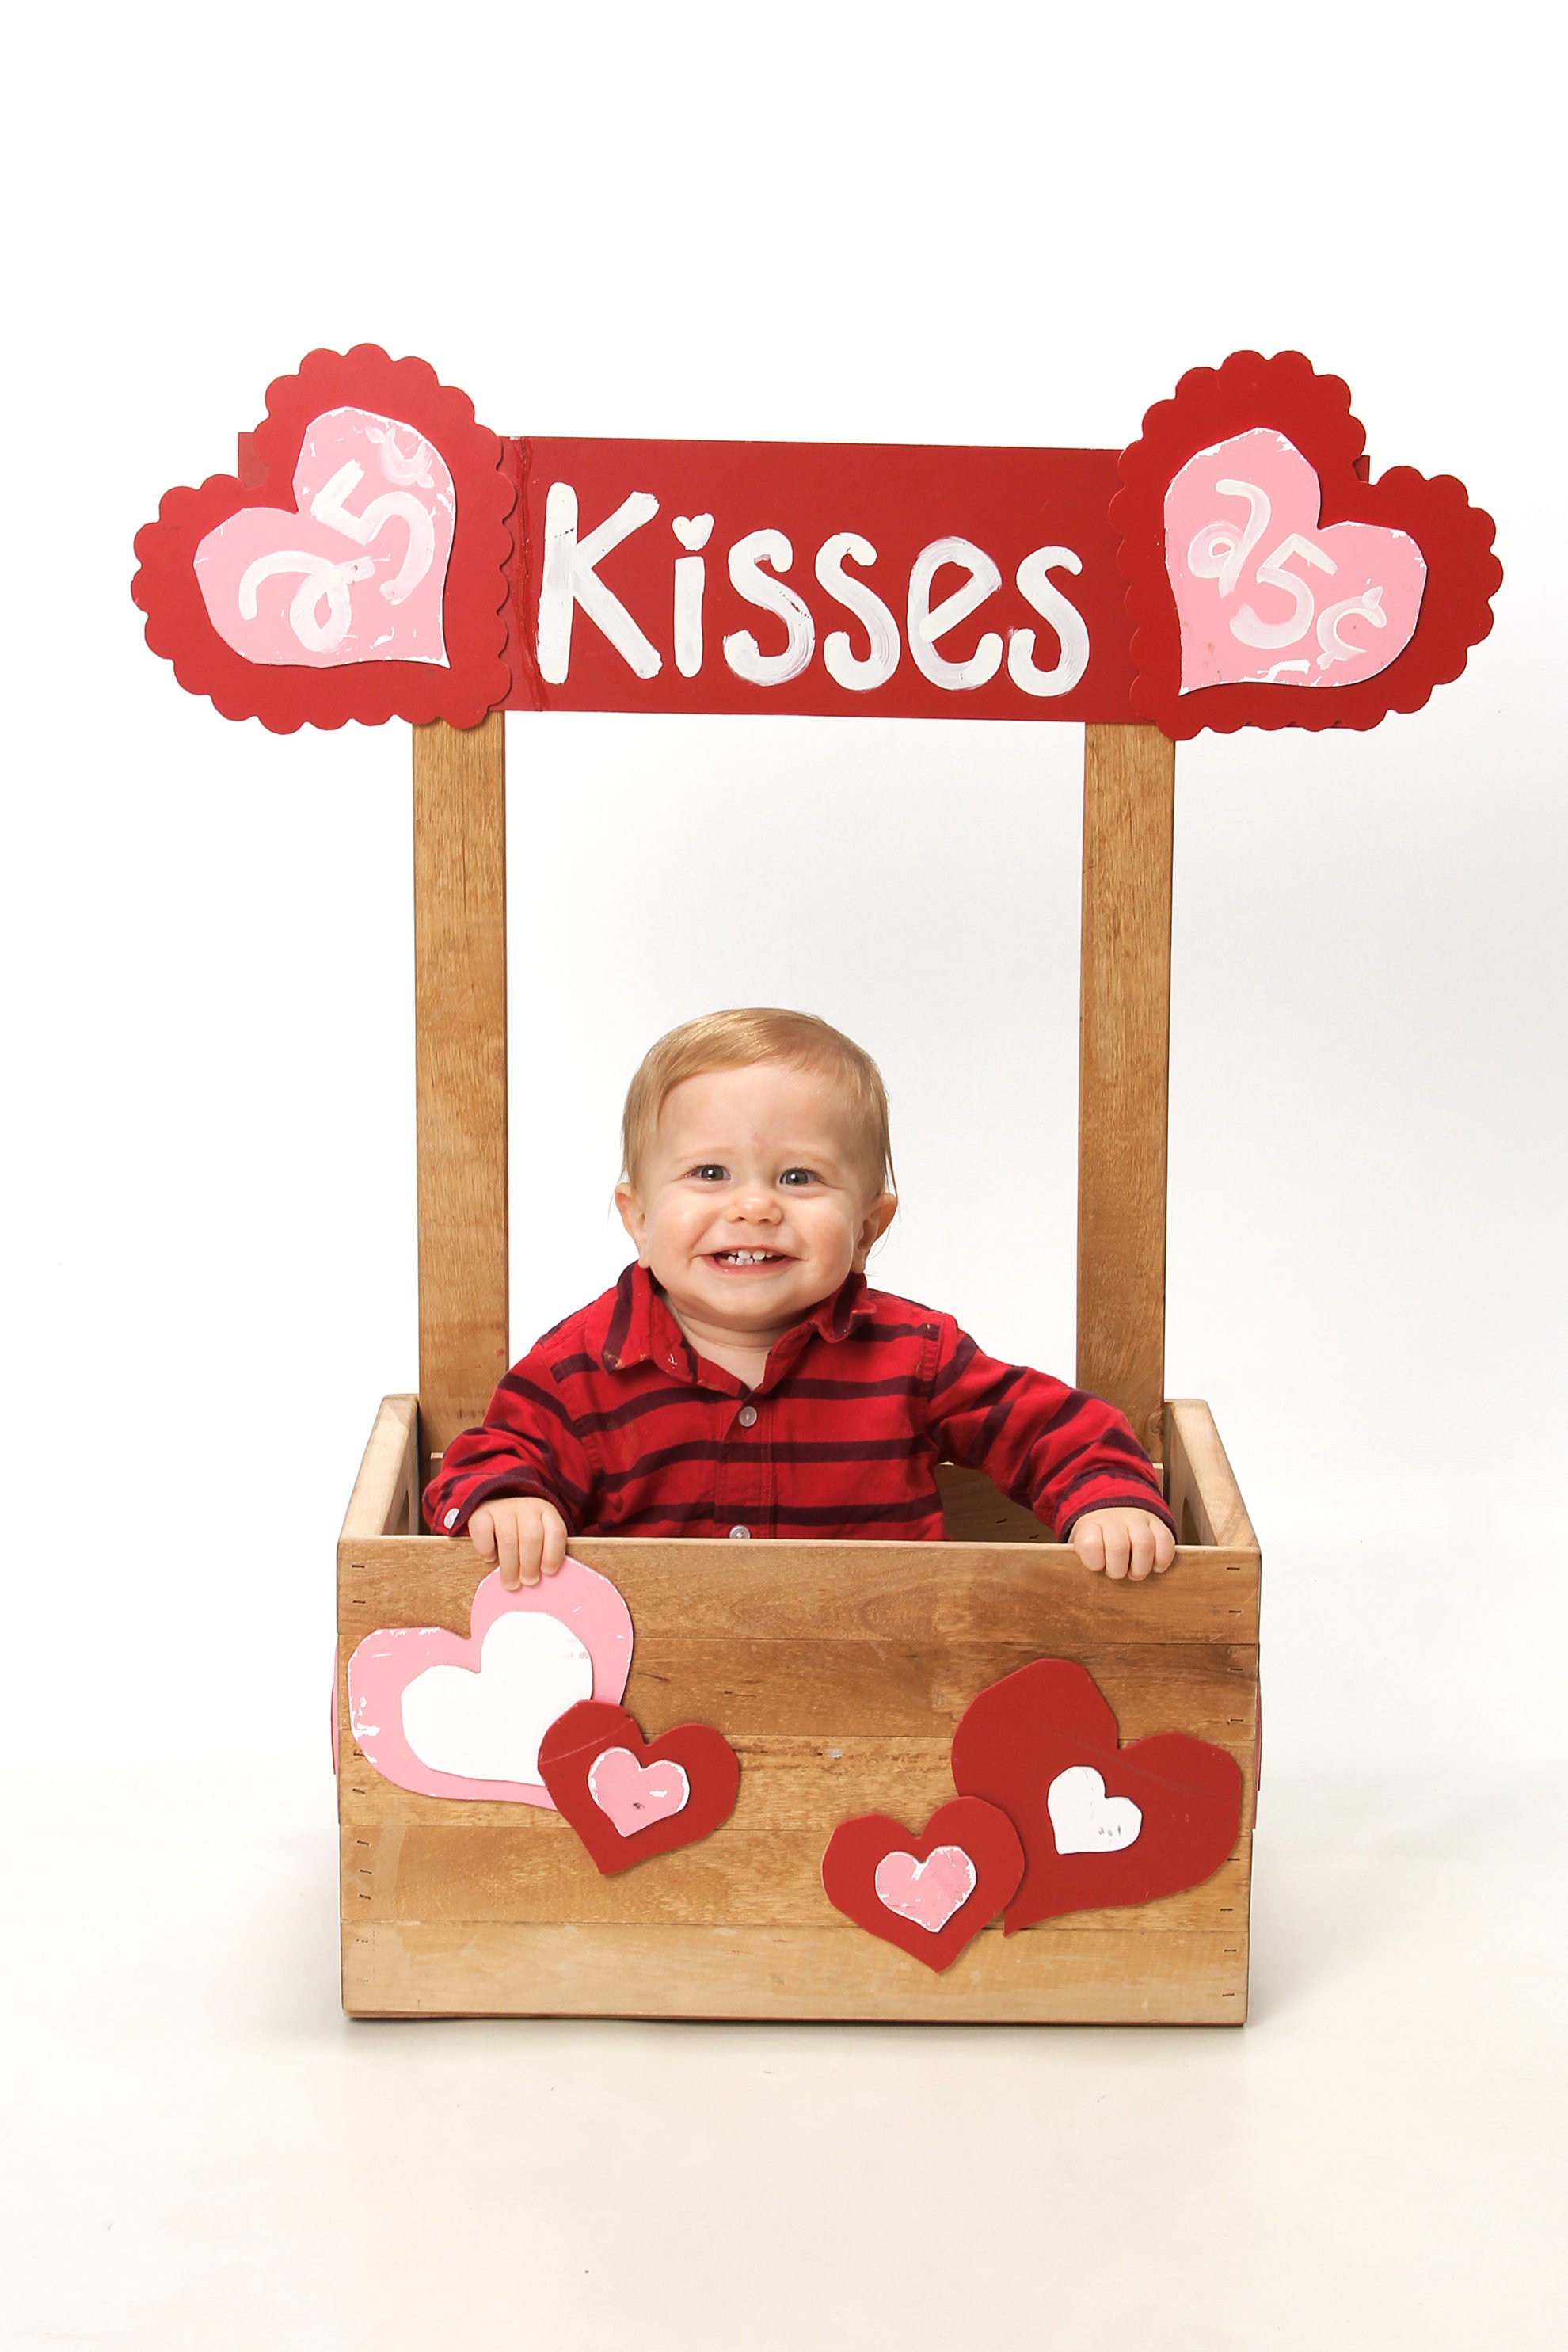 Little baby boy sitting in a kissing booth made out of a wood crate with hearts stapled on front.